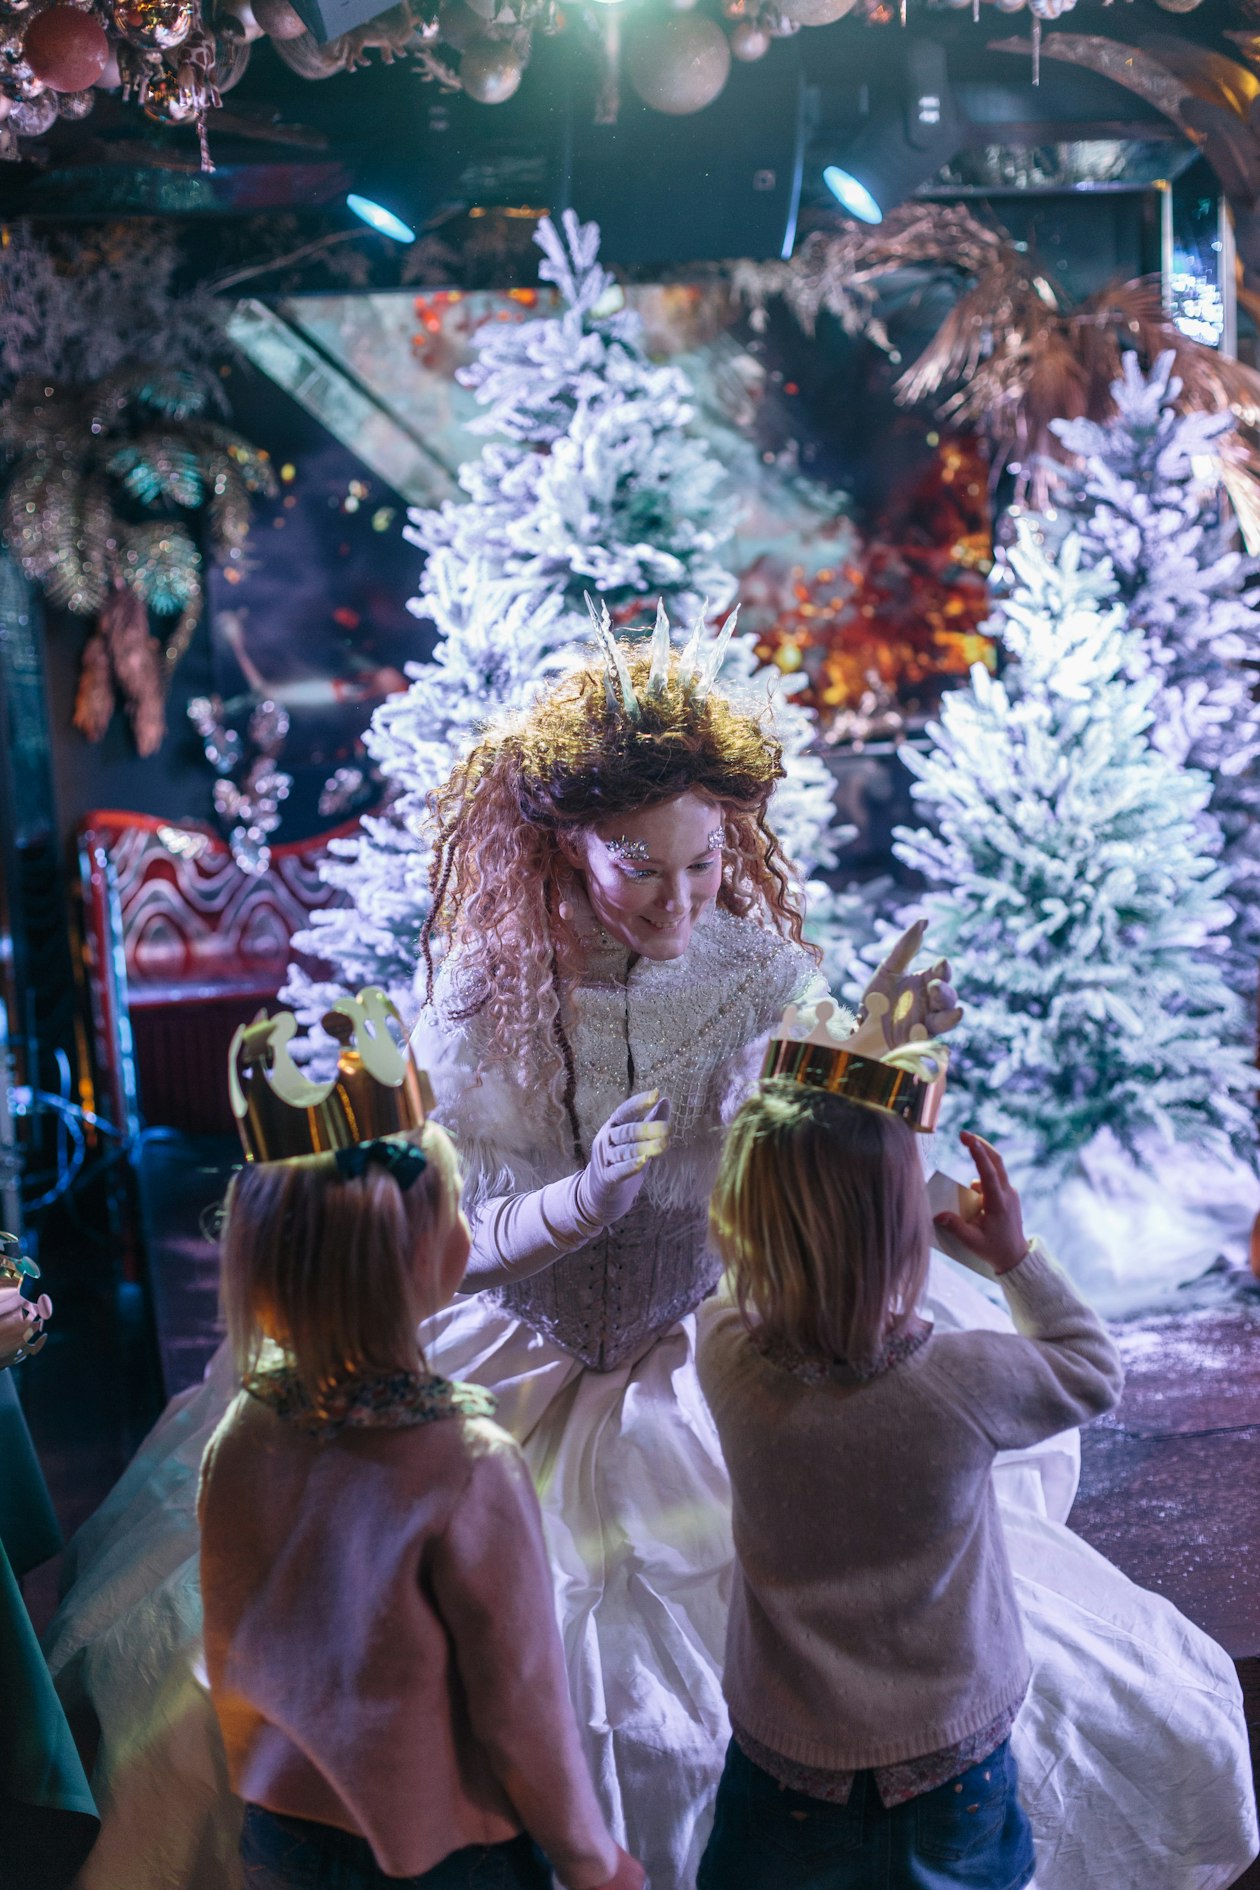 A Lion, Witch & the Wardrobe themed event at Annabel's - Annabel's, London's most exclusive private members' club